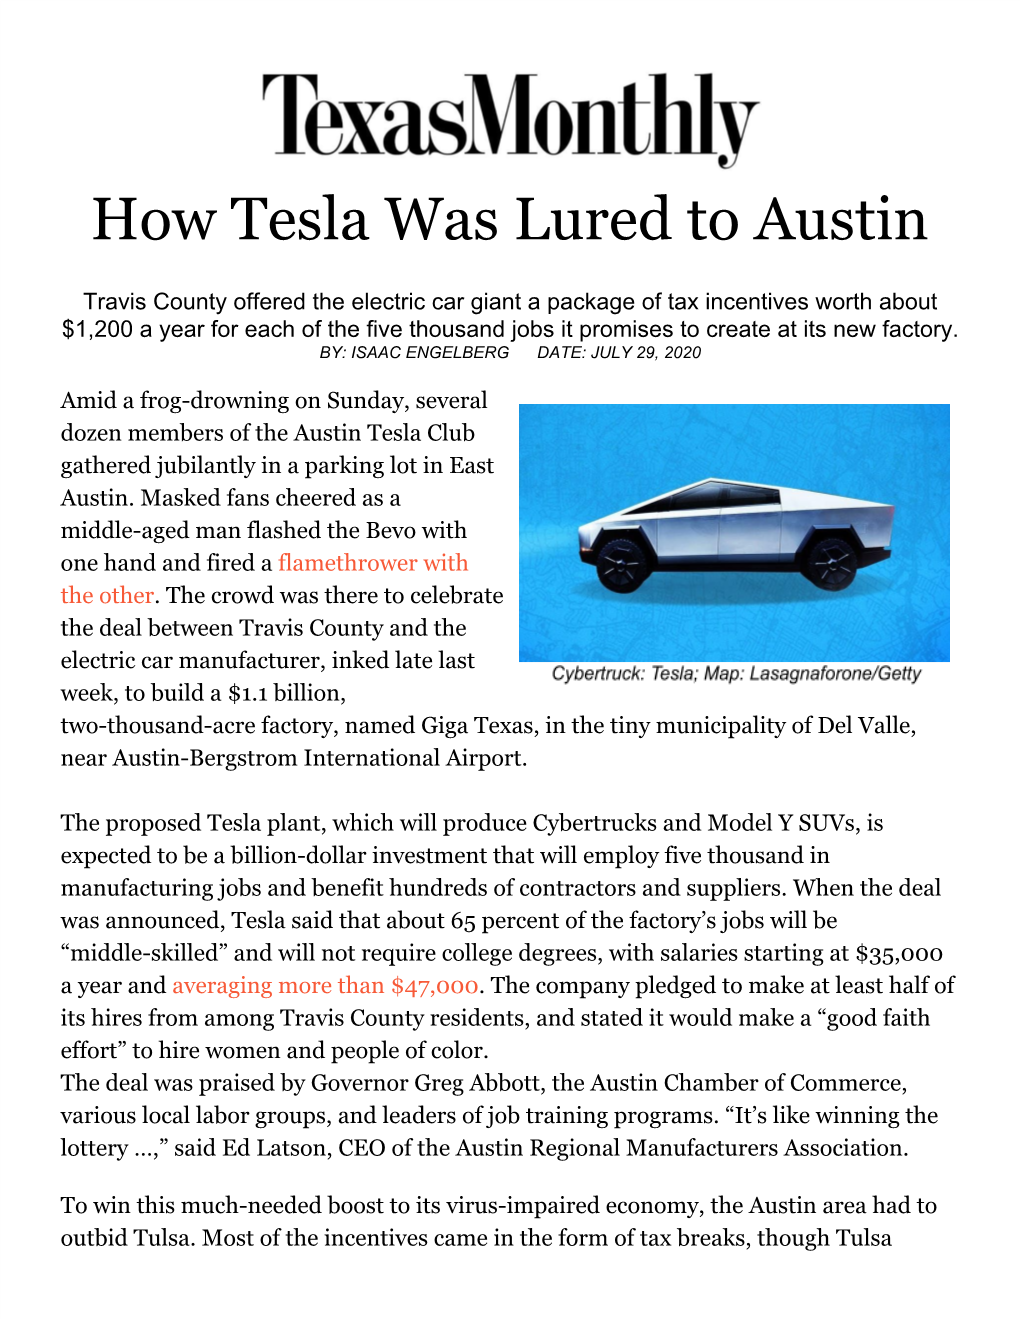 How Tesla Was Lured to Austin